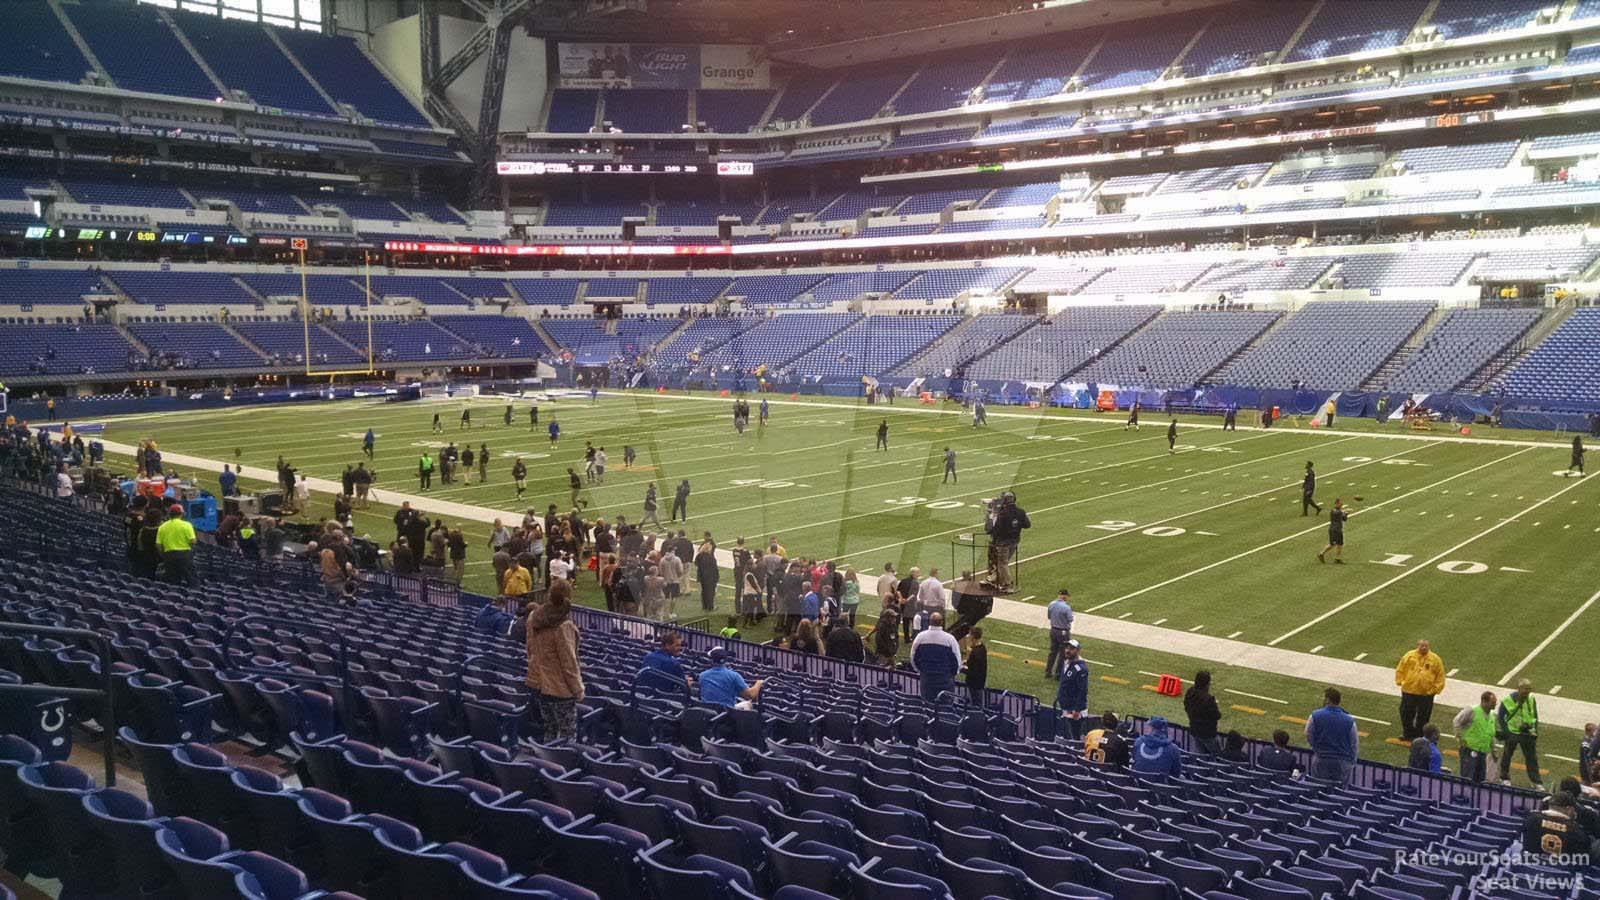 section 109, row 20 seat view  for football - lucas oil stadium